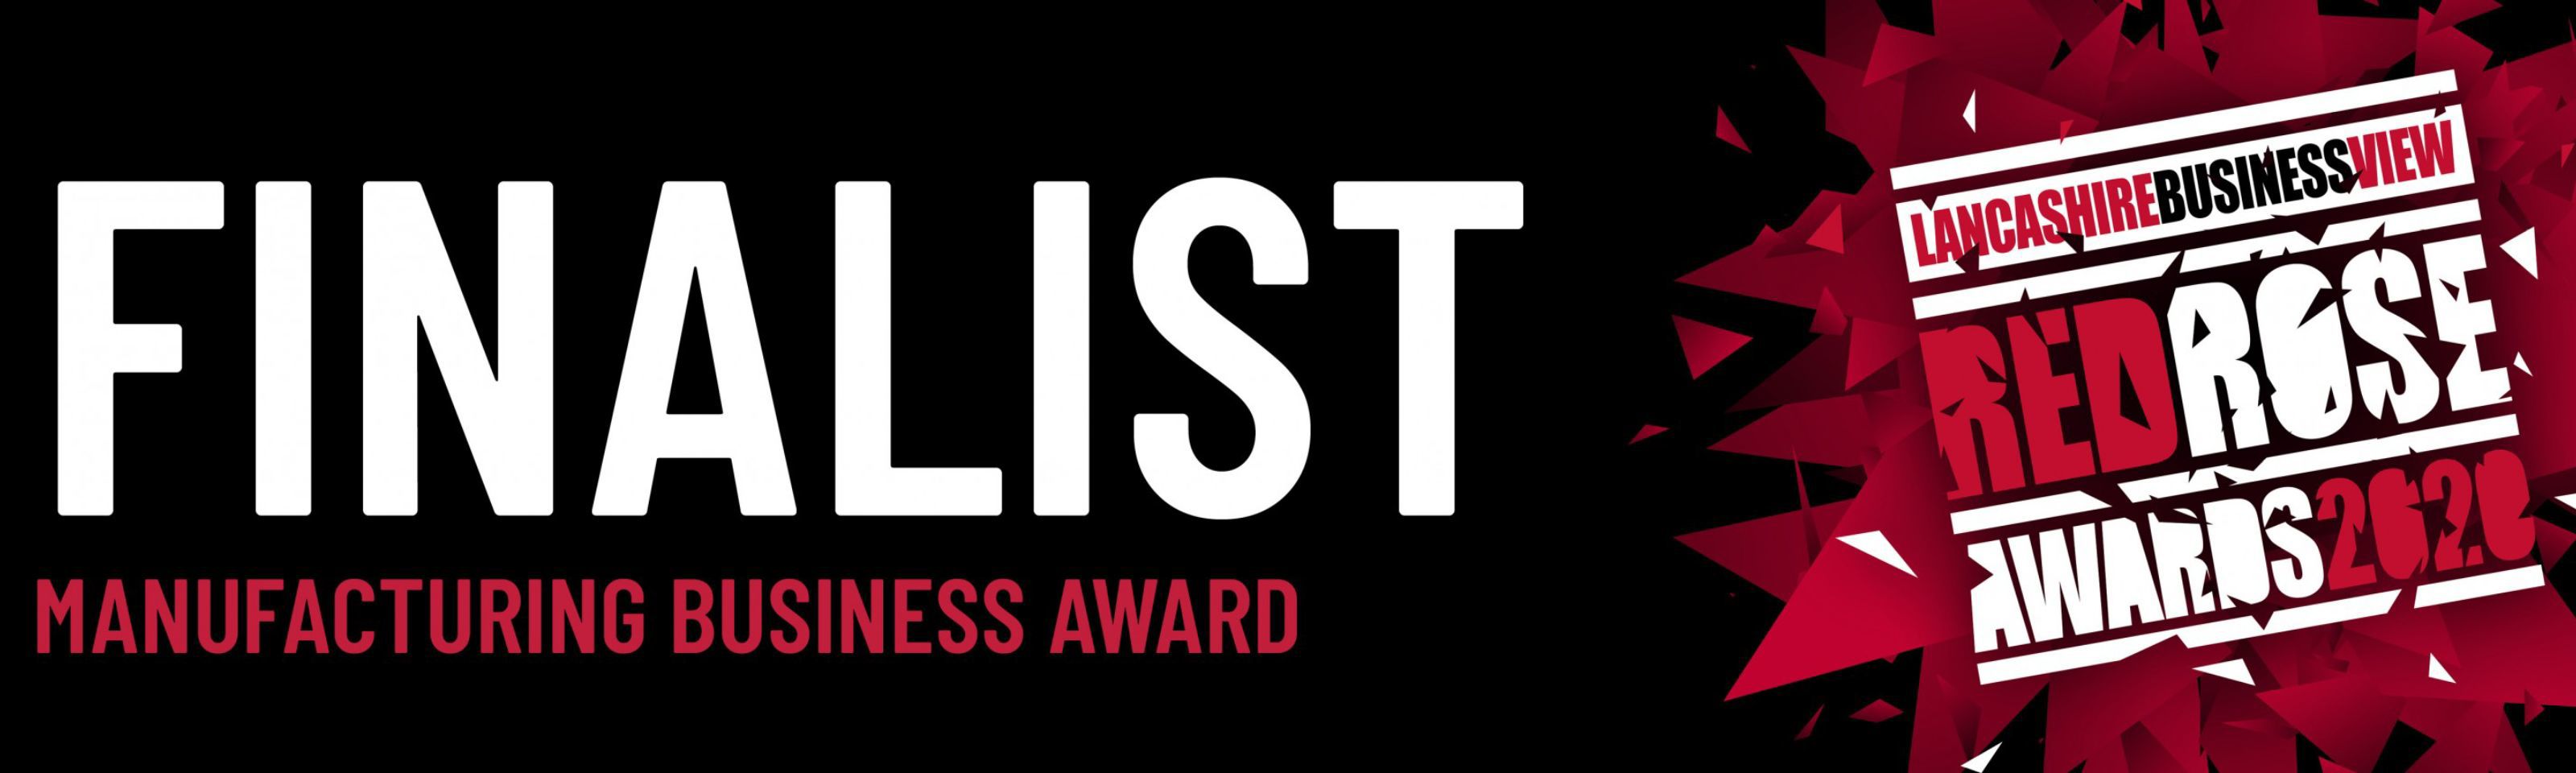 Red Rose Awards Finalists